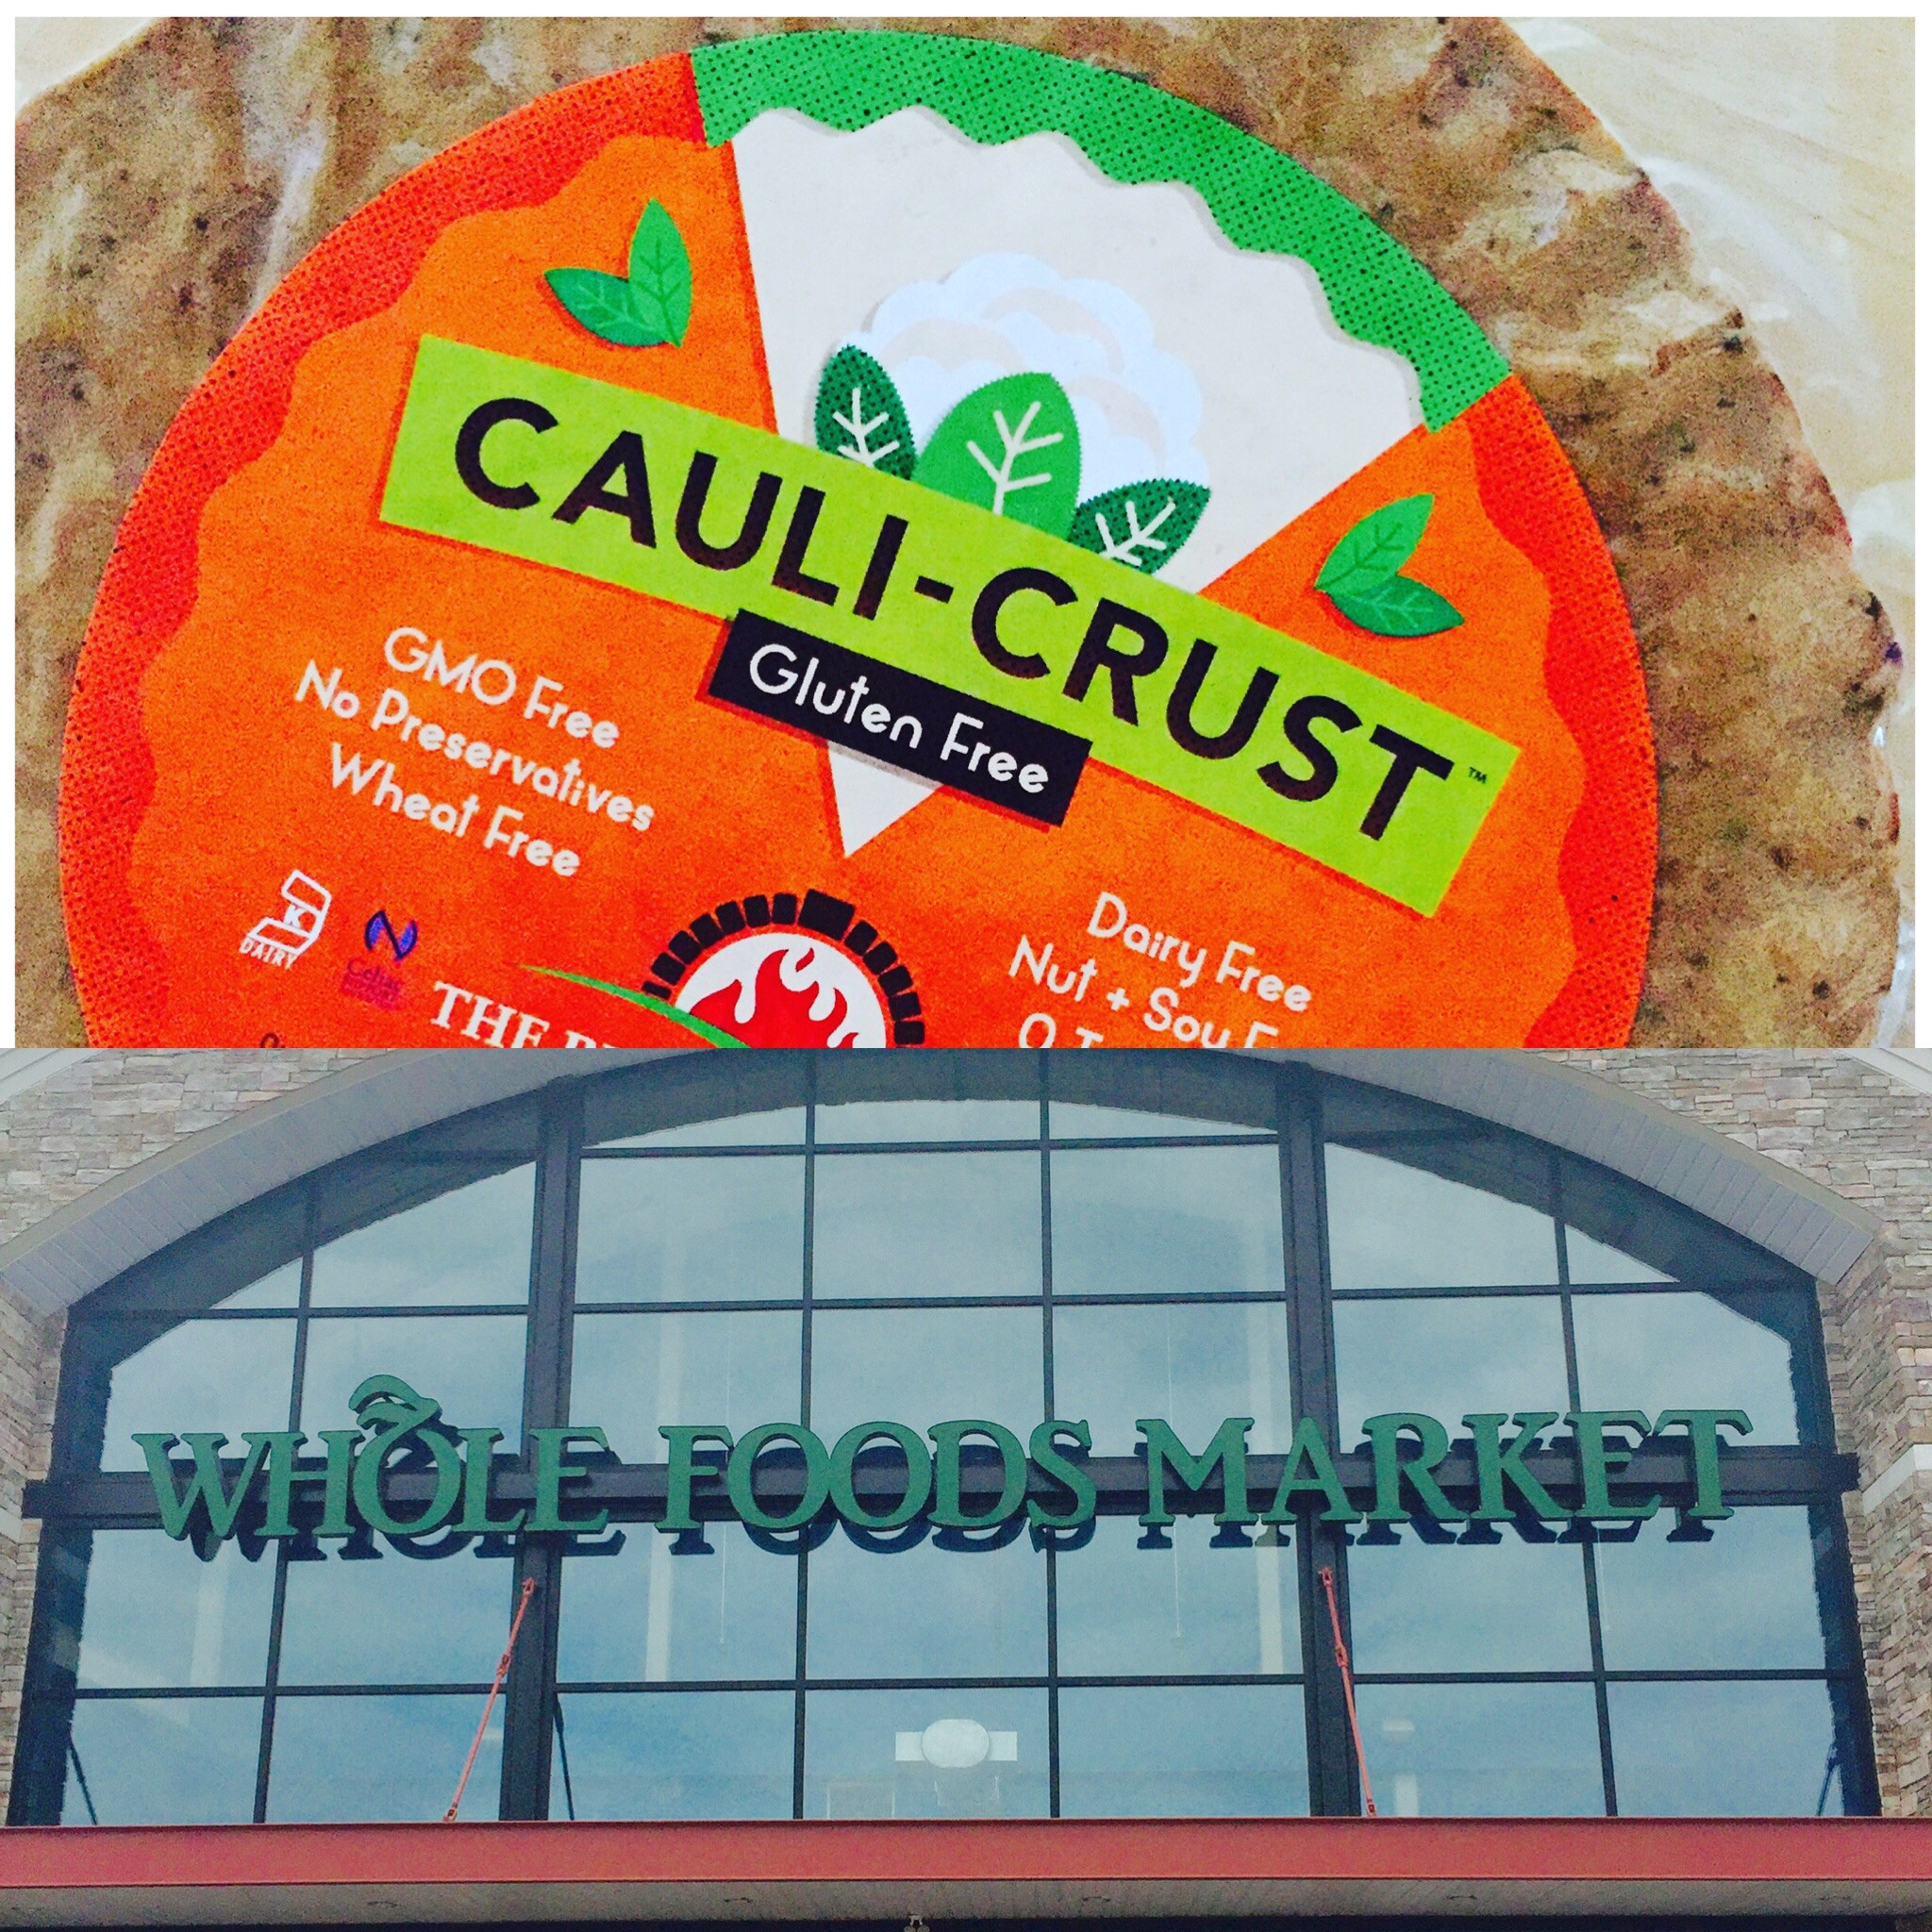 Gluten Free Pizza Dough Whole Foods
 The Blooming Oven Announces Cauli Crust Gluten Free